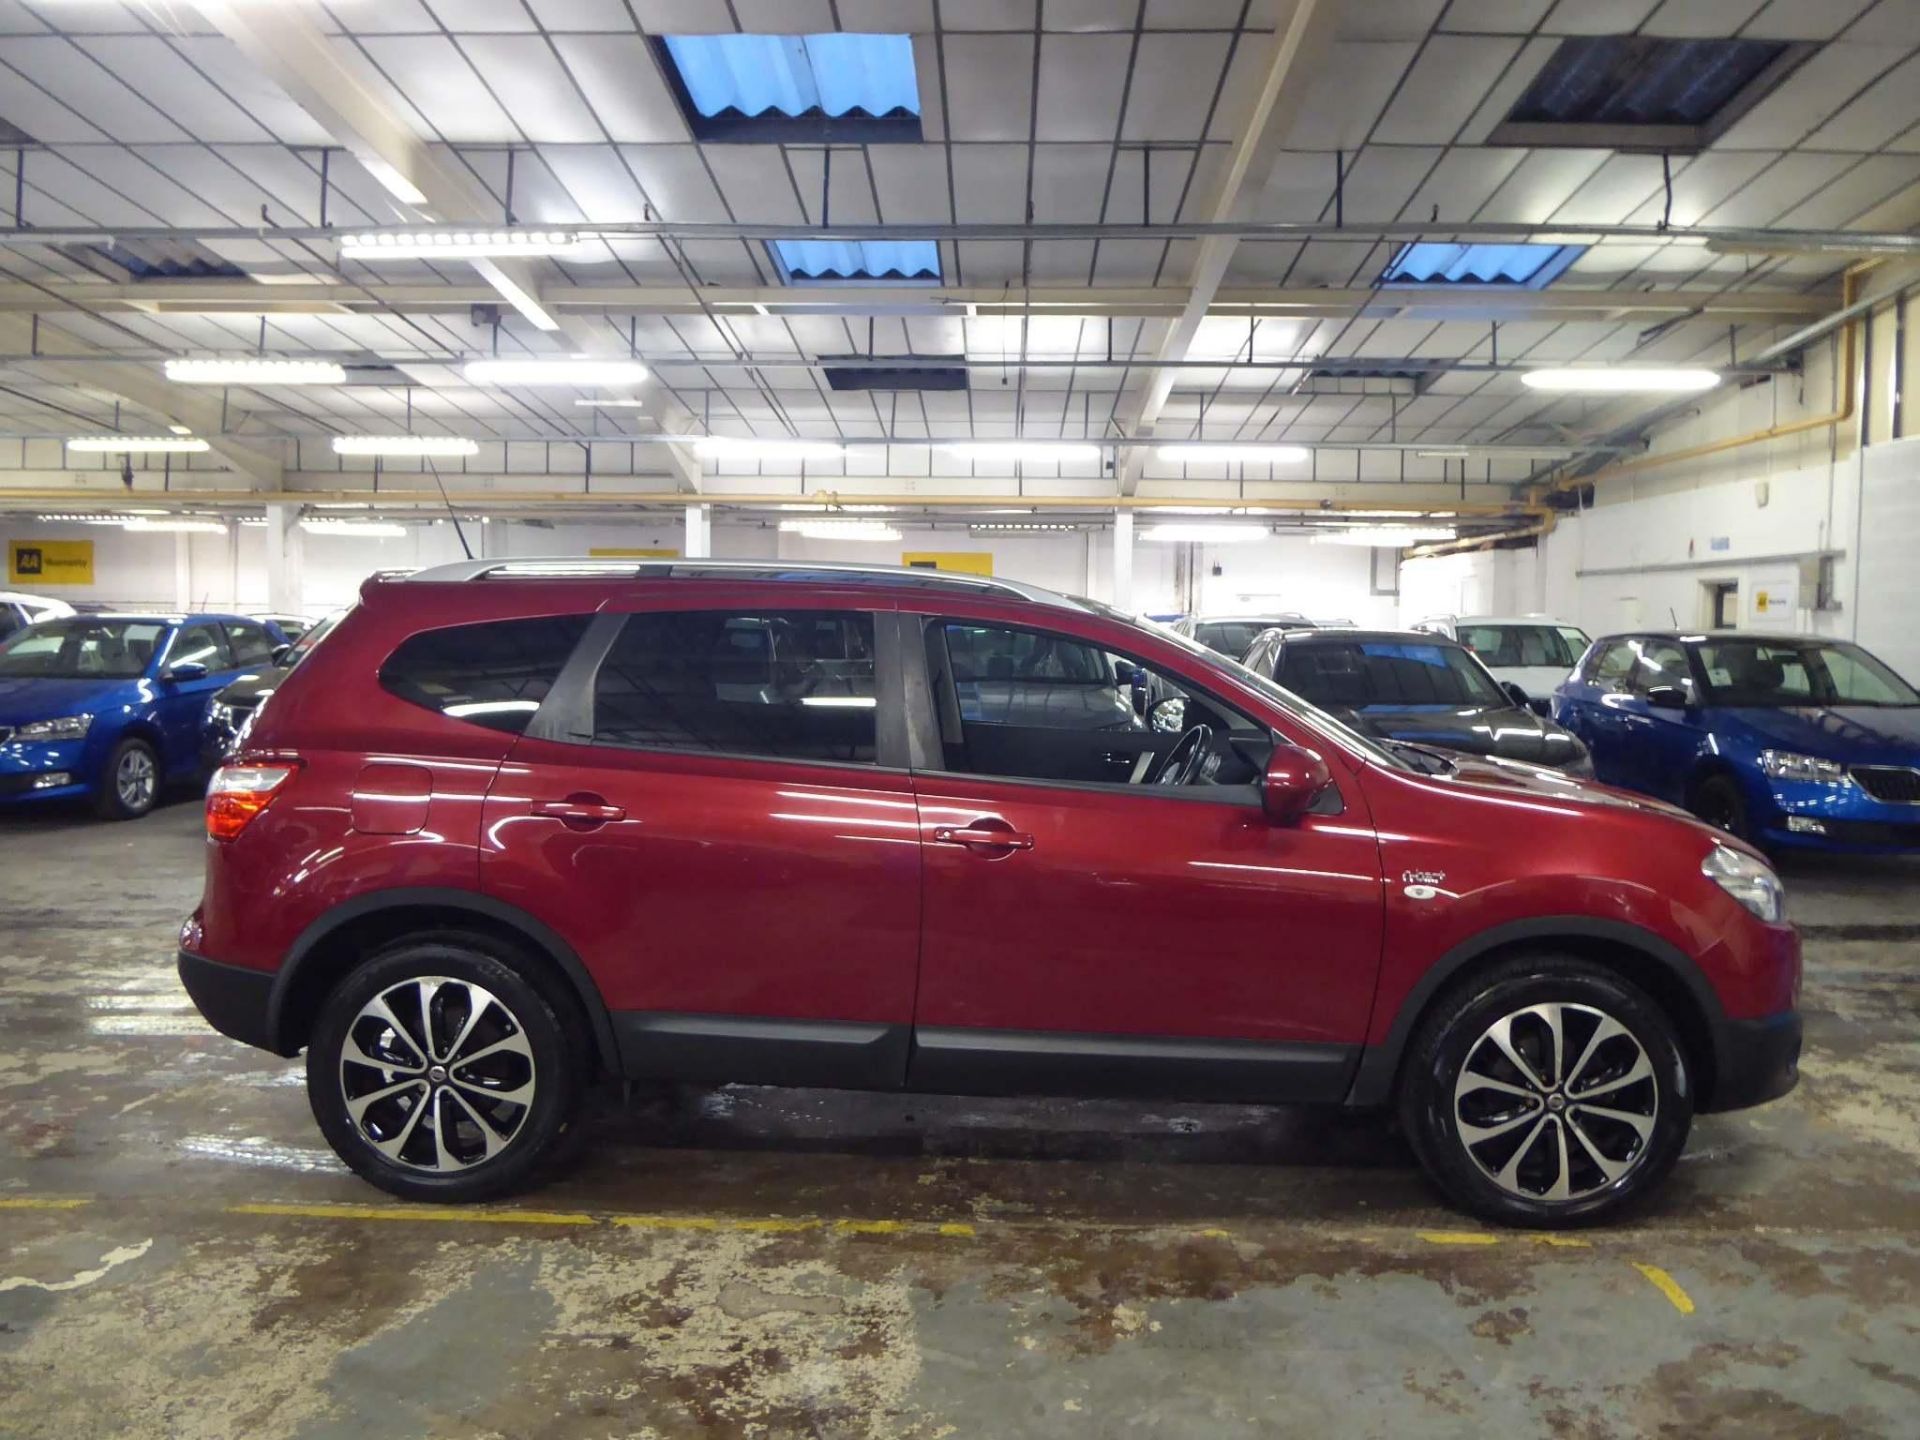 2012 Nissan Qashqai +2 N - Tech+Dci 5Dr 7-Seater SUV - CL505 - NO VAT ON THE HAMMER - - Image 8 of 24